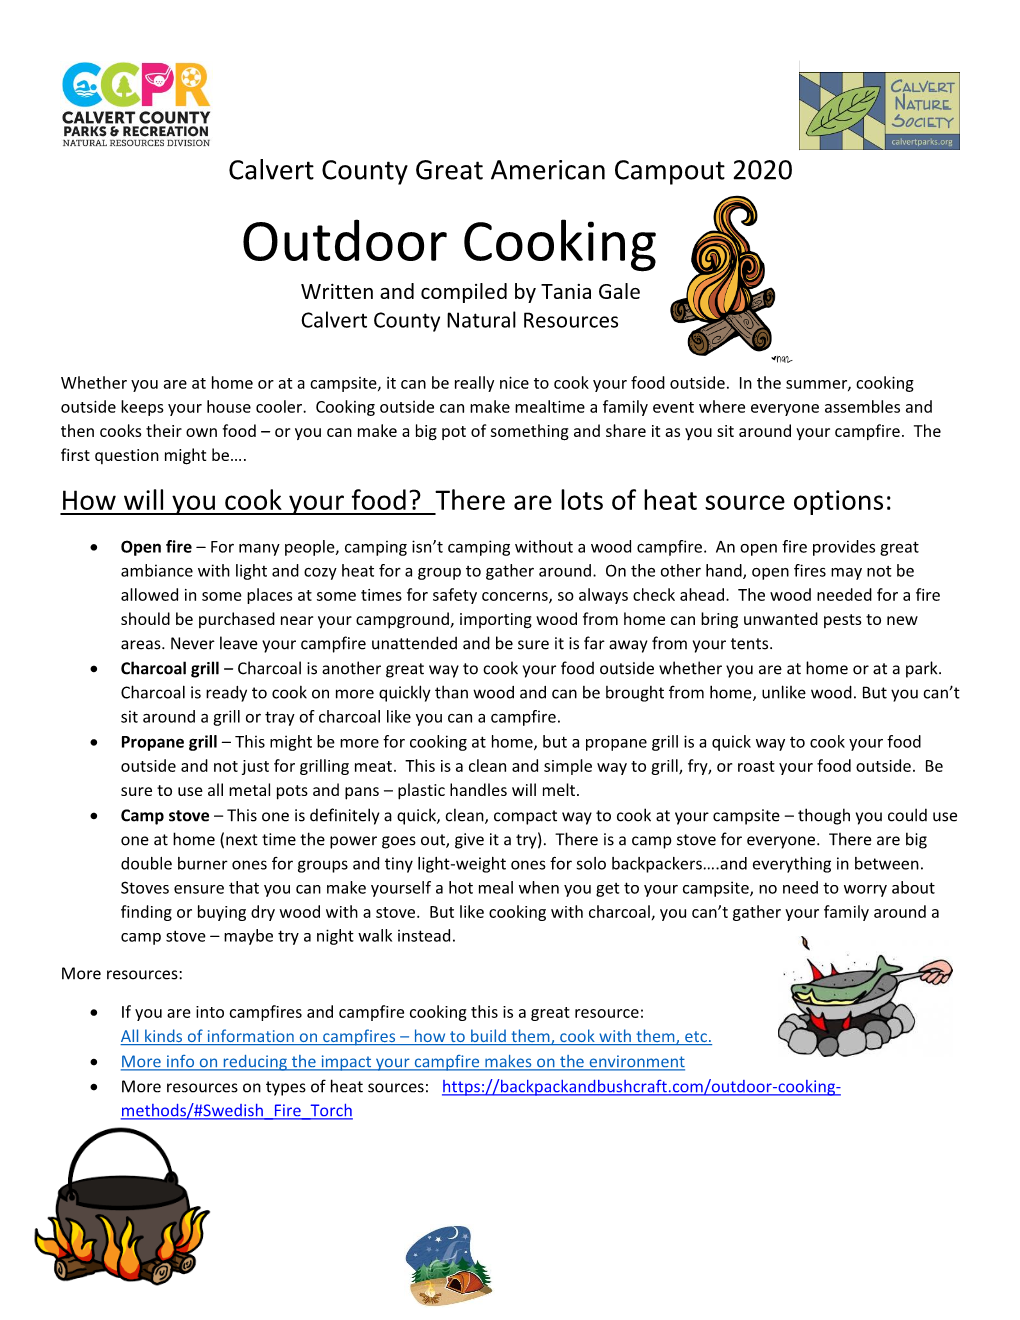 Outdoor Cooking Written and Compiled by Tania Gale Calvert County Natural Resources